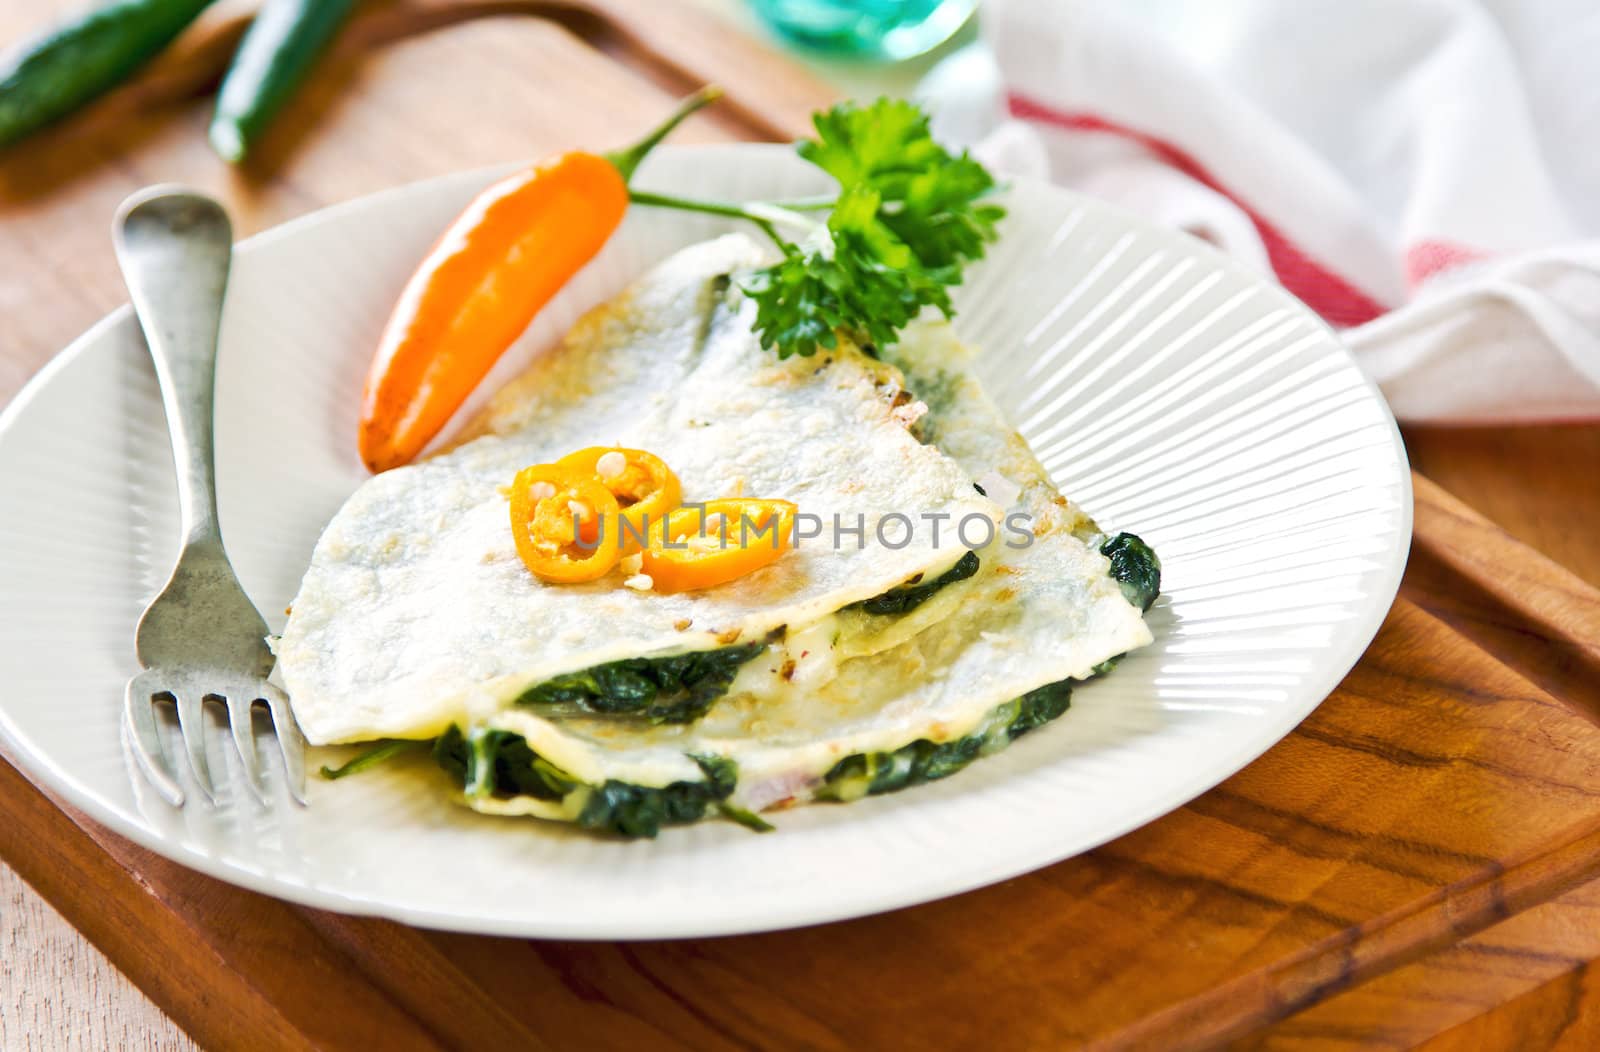 Spinach and cheese Quesadilla by vanillaechoes